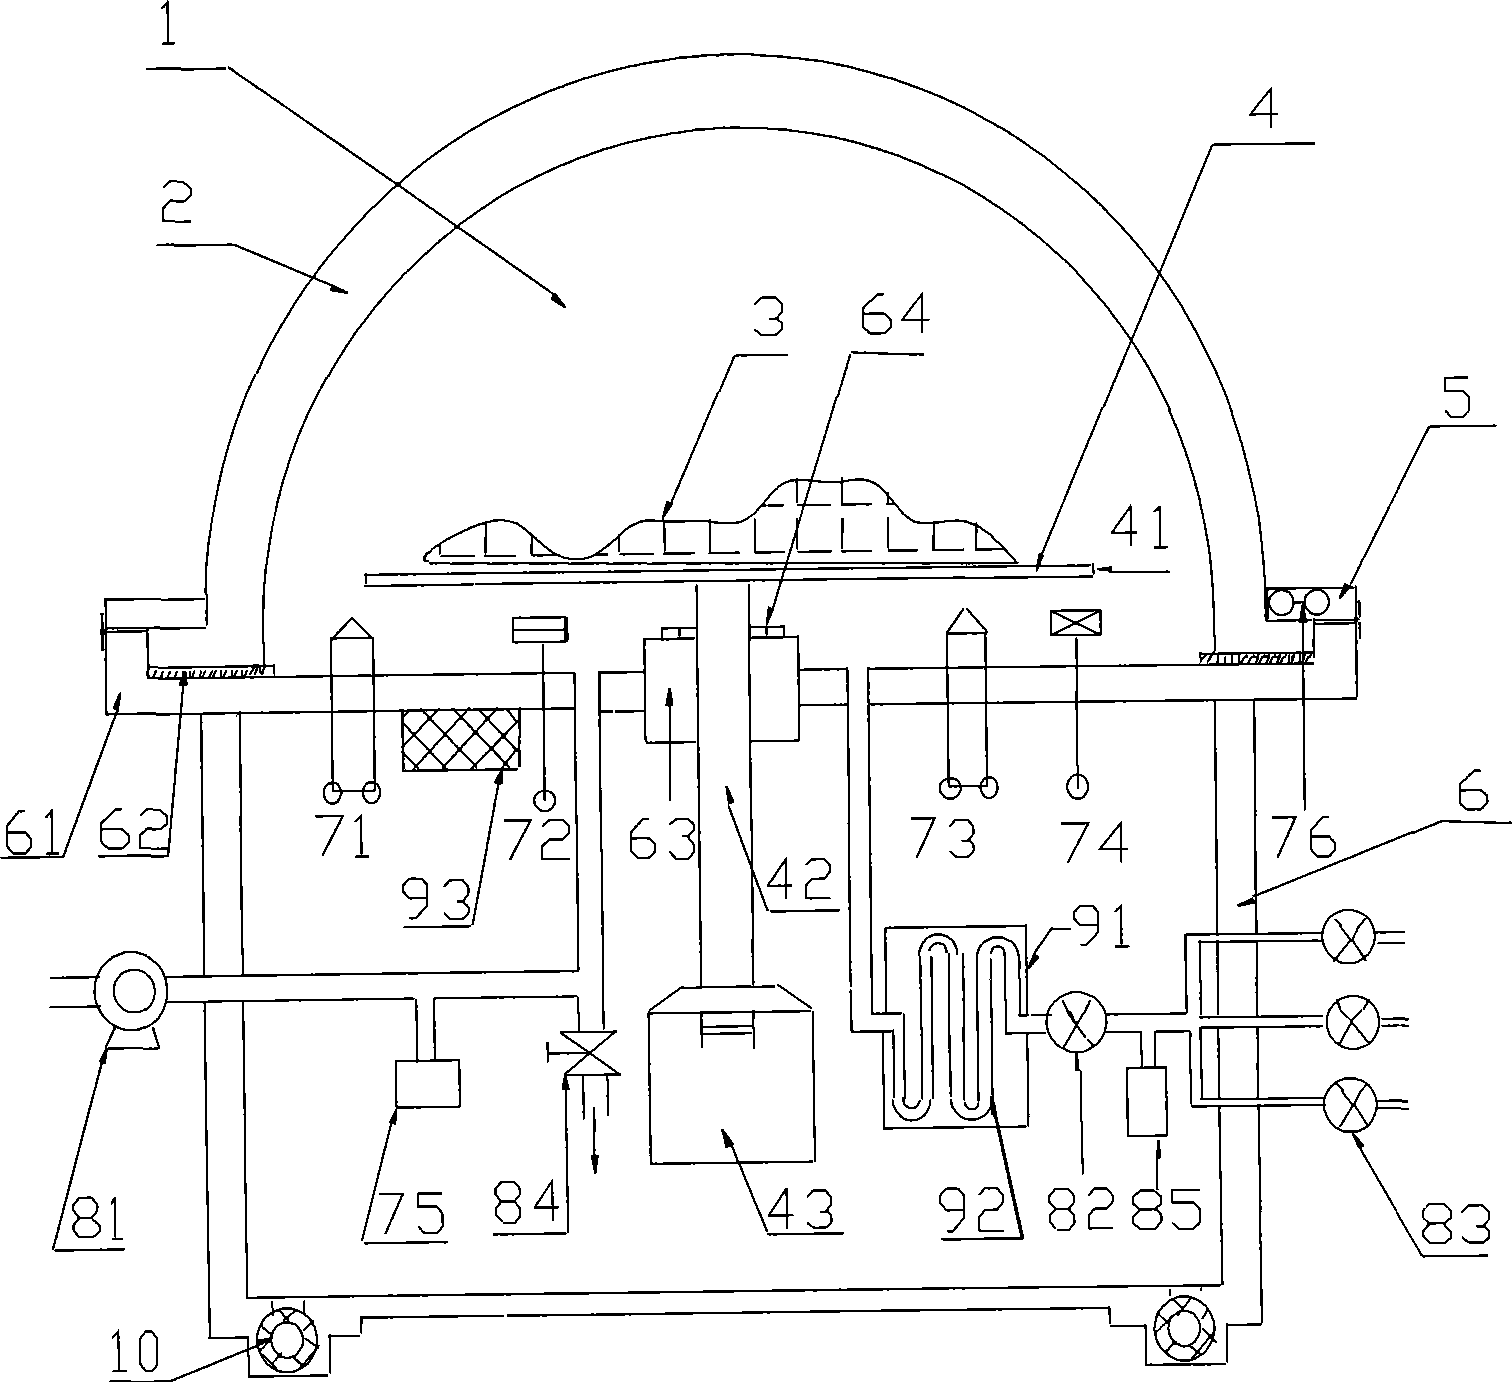 Device with culture relics exhibiting and protecting function